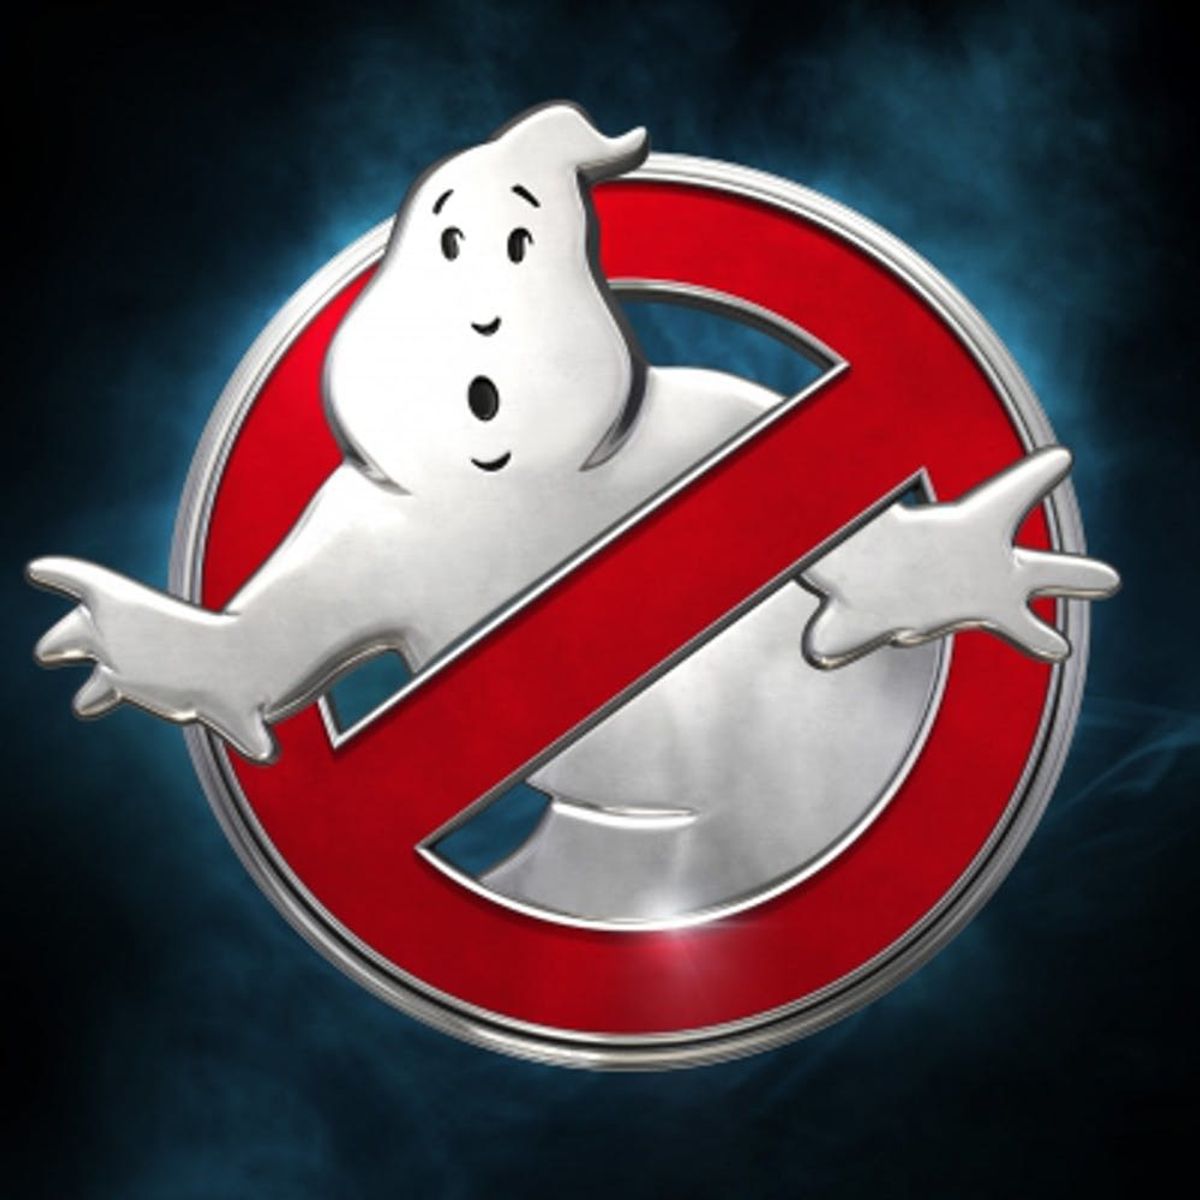 The New Ghostbusters Trailer Is Melissa McCarthy and Kristen Wiig Gold